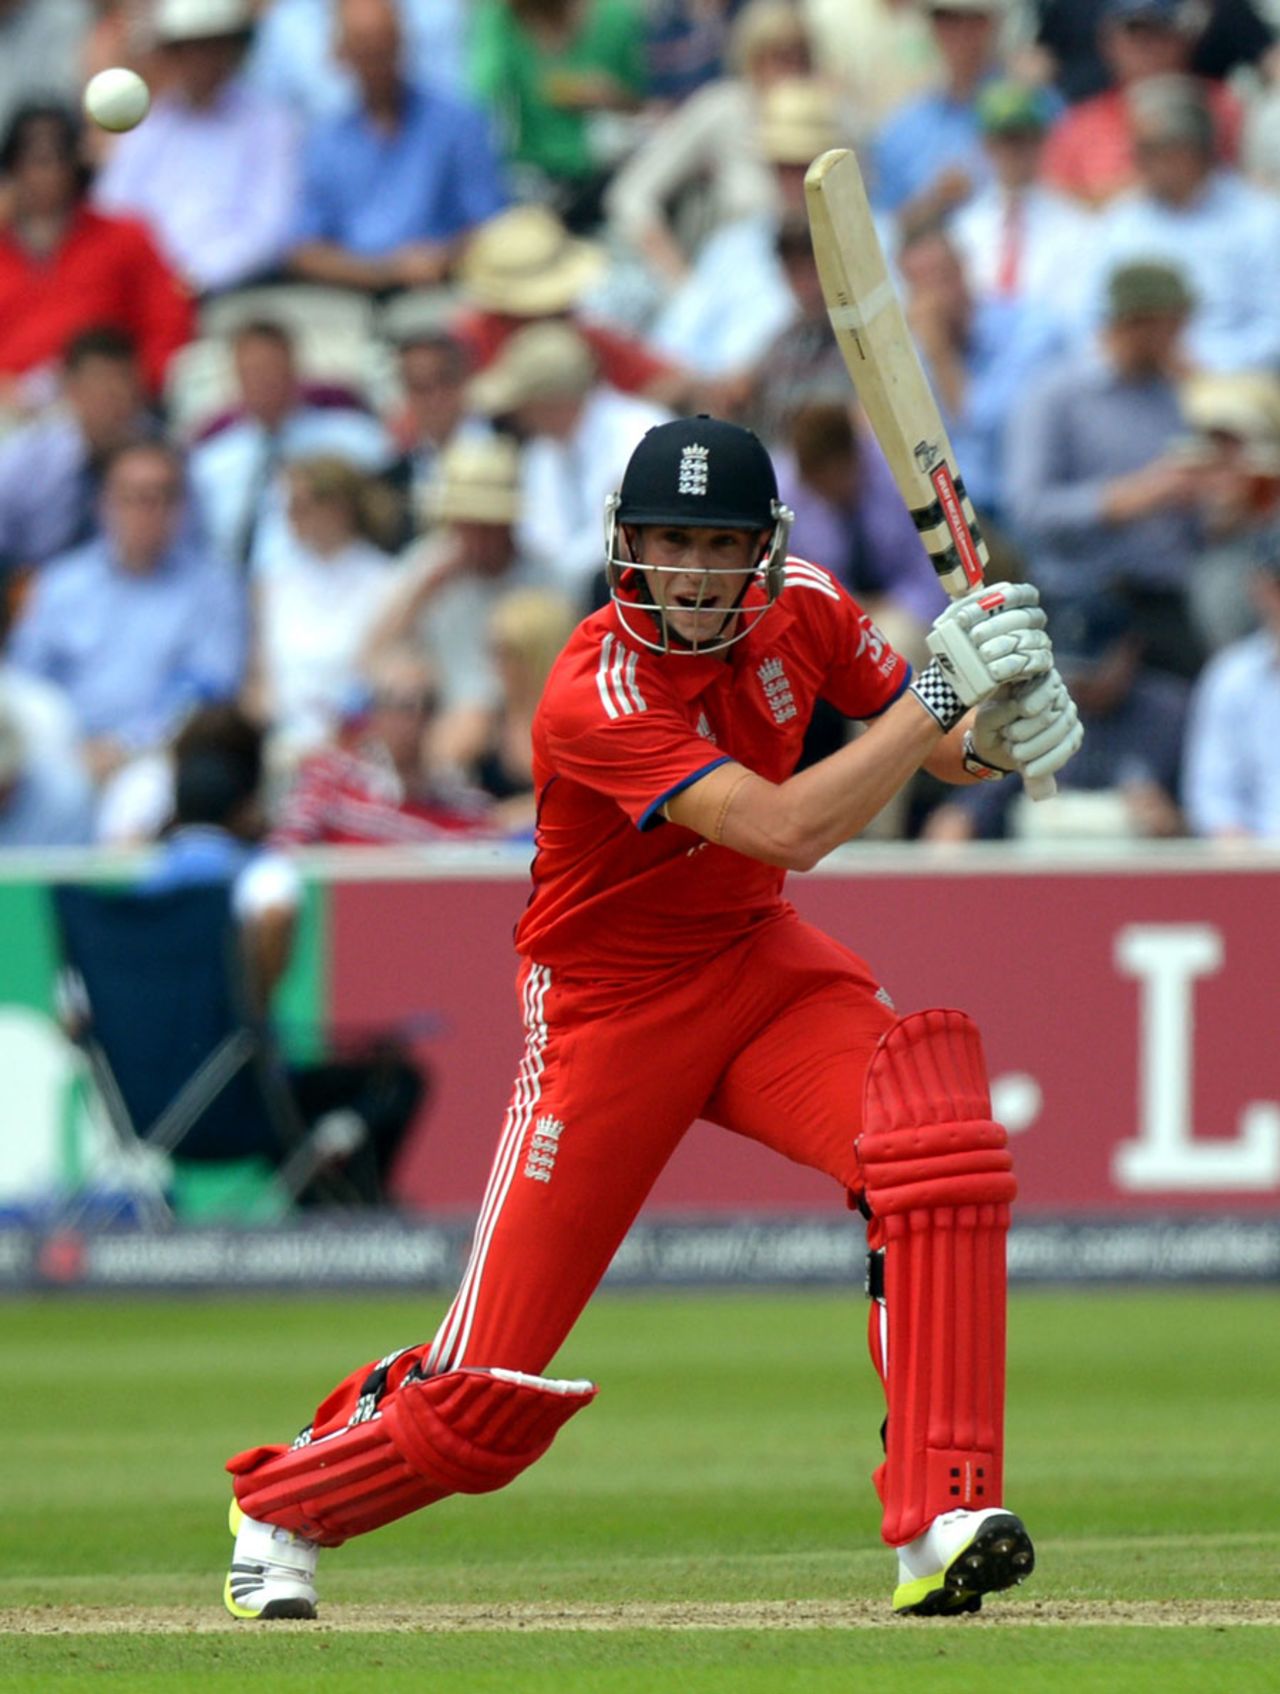 Chris Woakes played steadily for 36, England v New Zealand, 1st ODI, Lord's, May 31, 2013